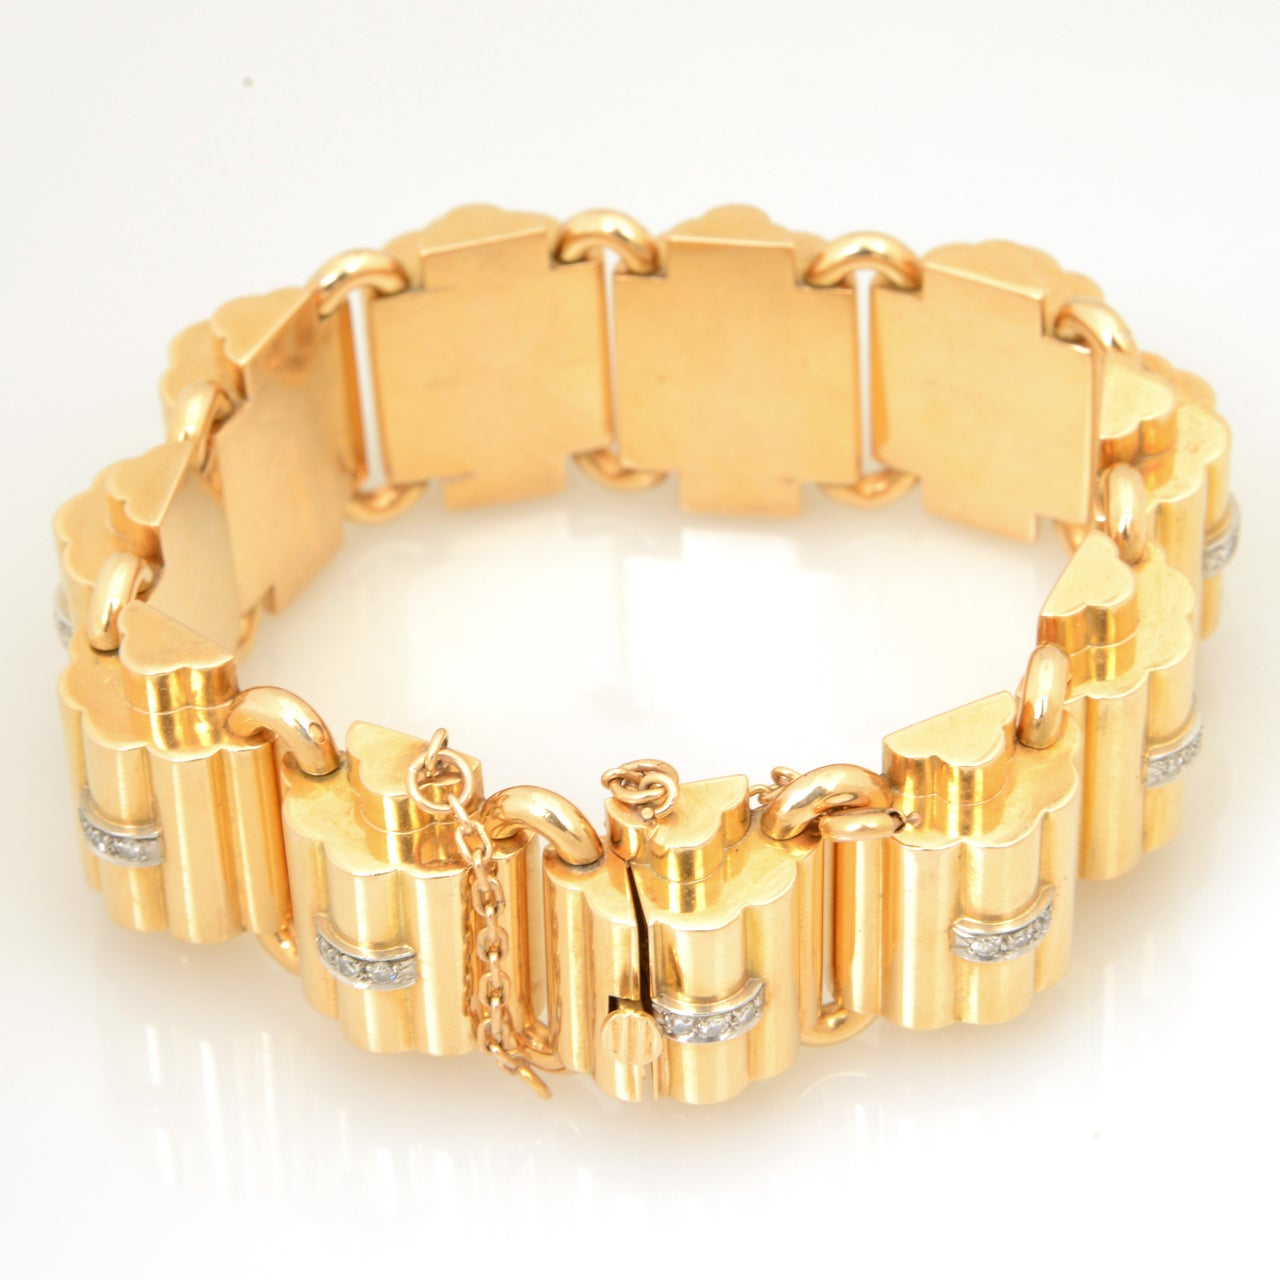 Fabulous Retro 1940s Wide Diamond and Gold Stylized Dome Bracelet In Good Condition For Sale In Miami Beach, FL